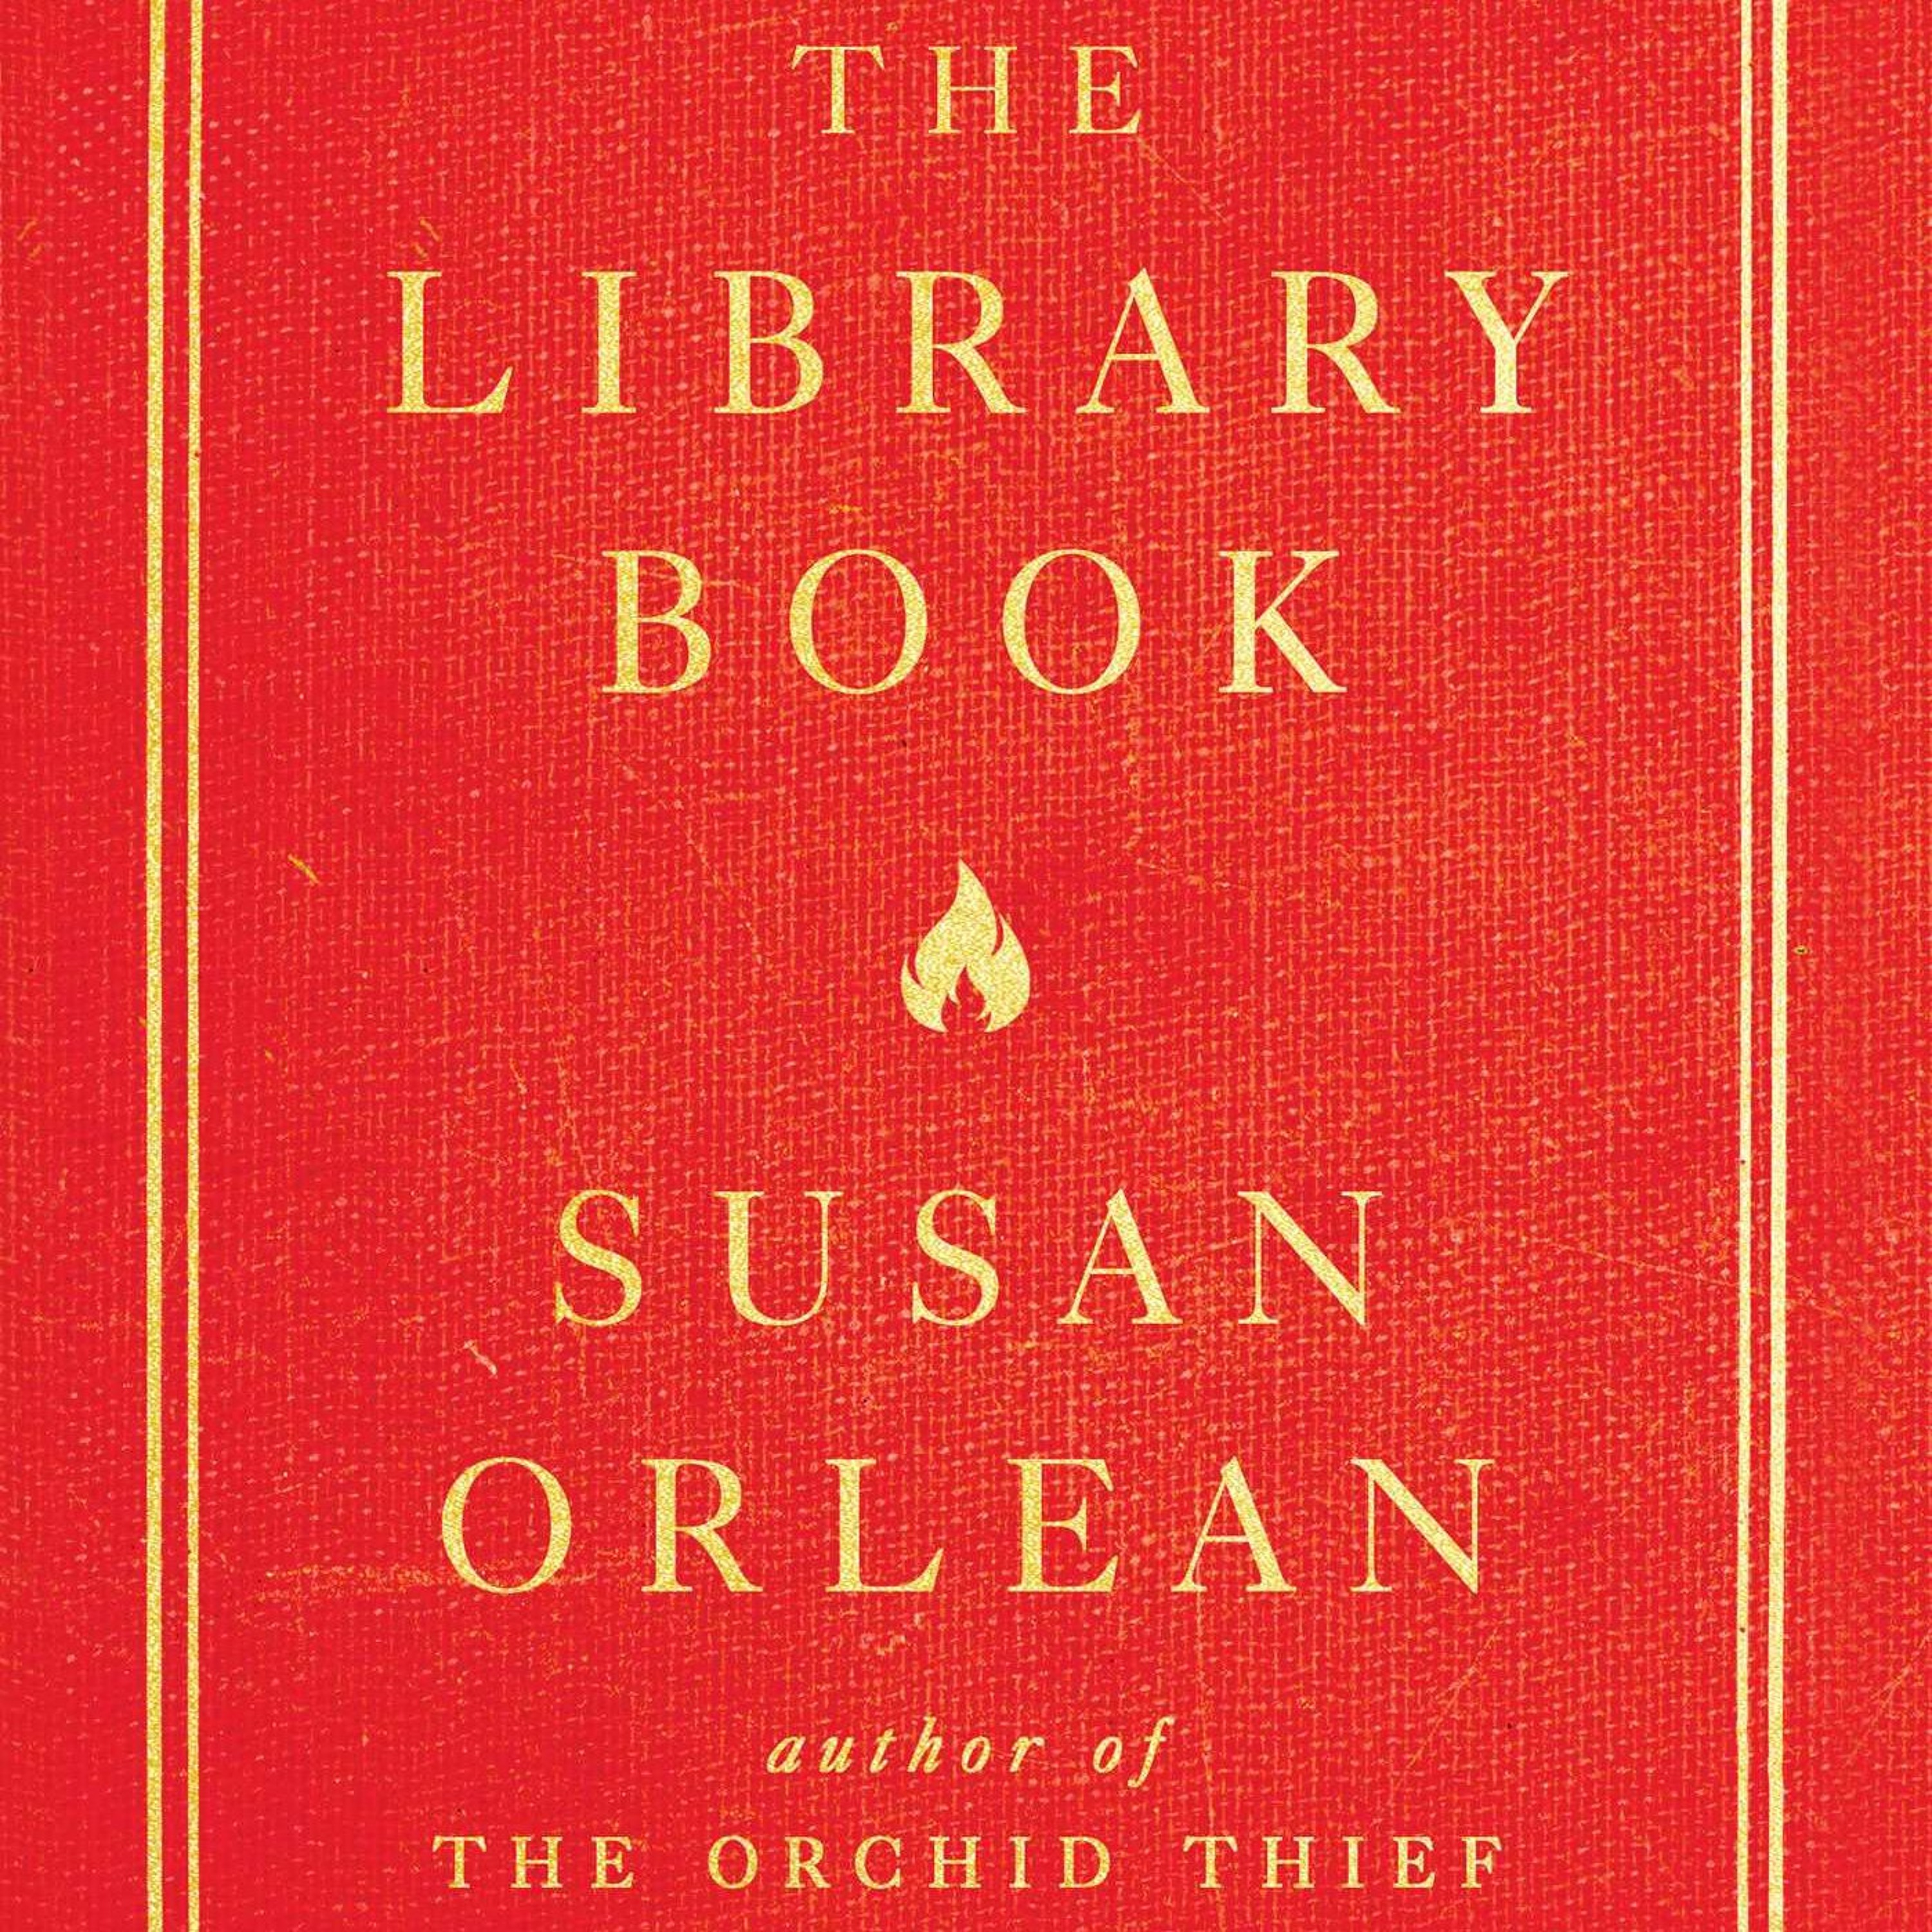 Susan Orlean, “The Library Book”